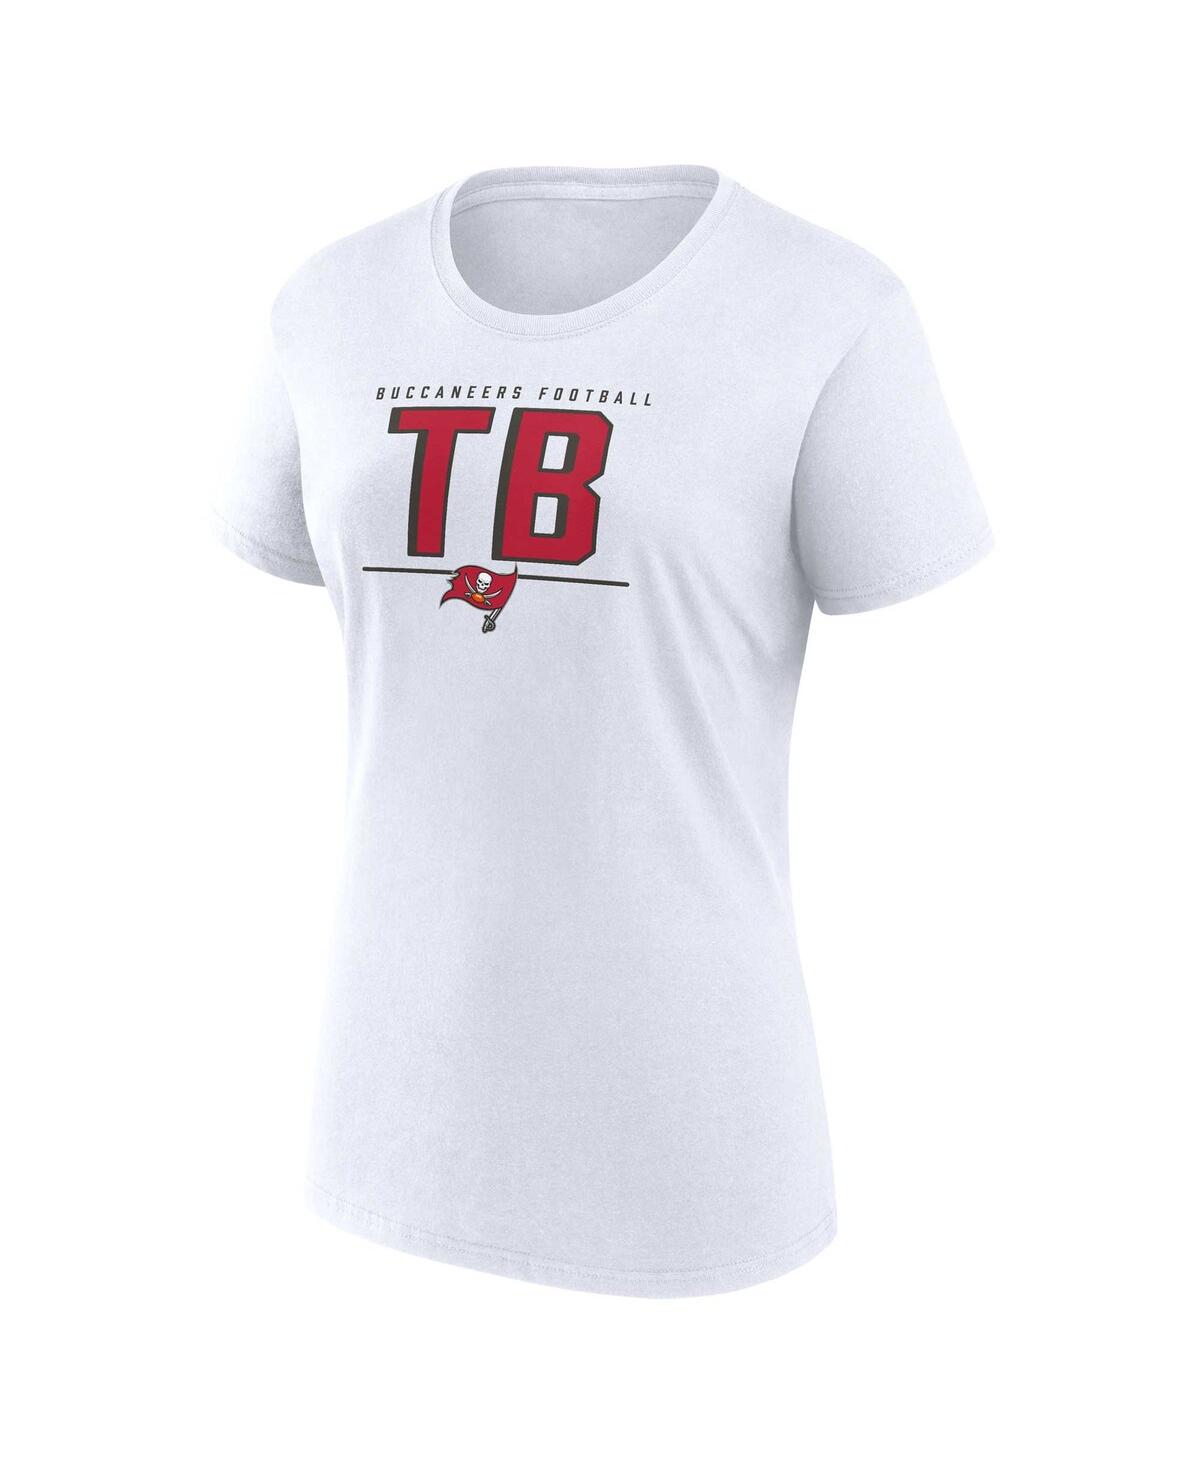 Shop Fanatics Women's  Red, White Tampa Bay Buccaneers Two-pack Combo Cheerleaderâ T-shirt Set In Red,white